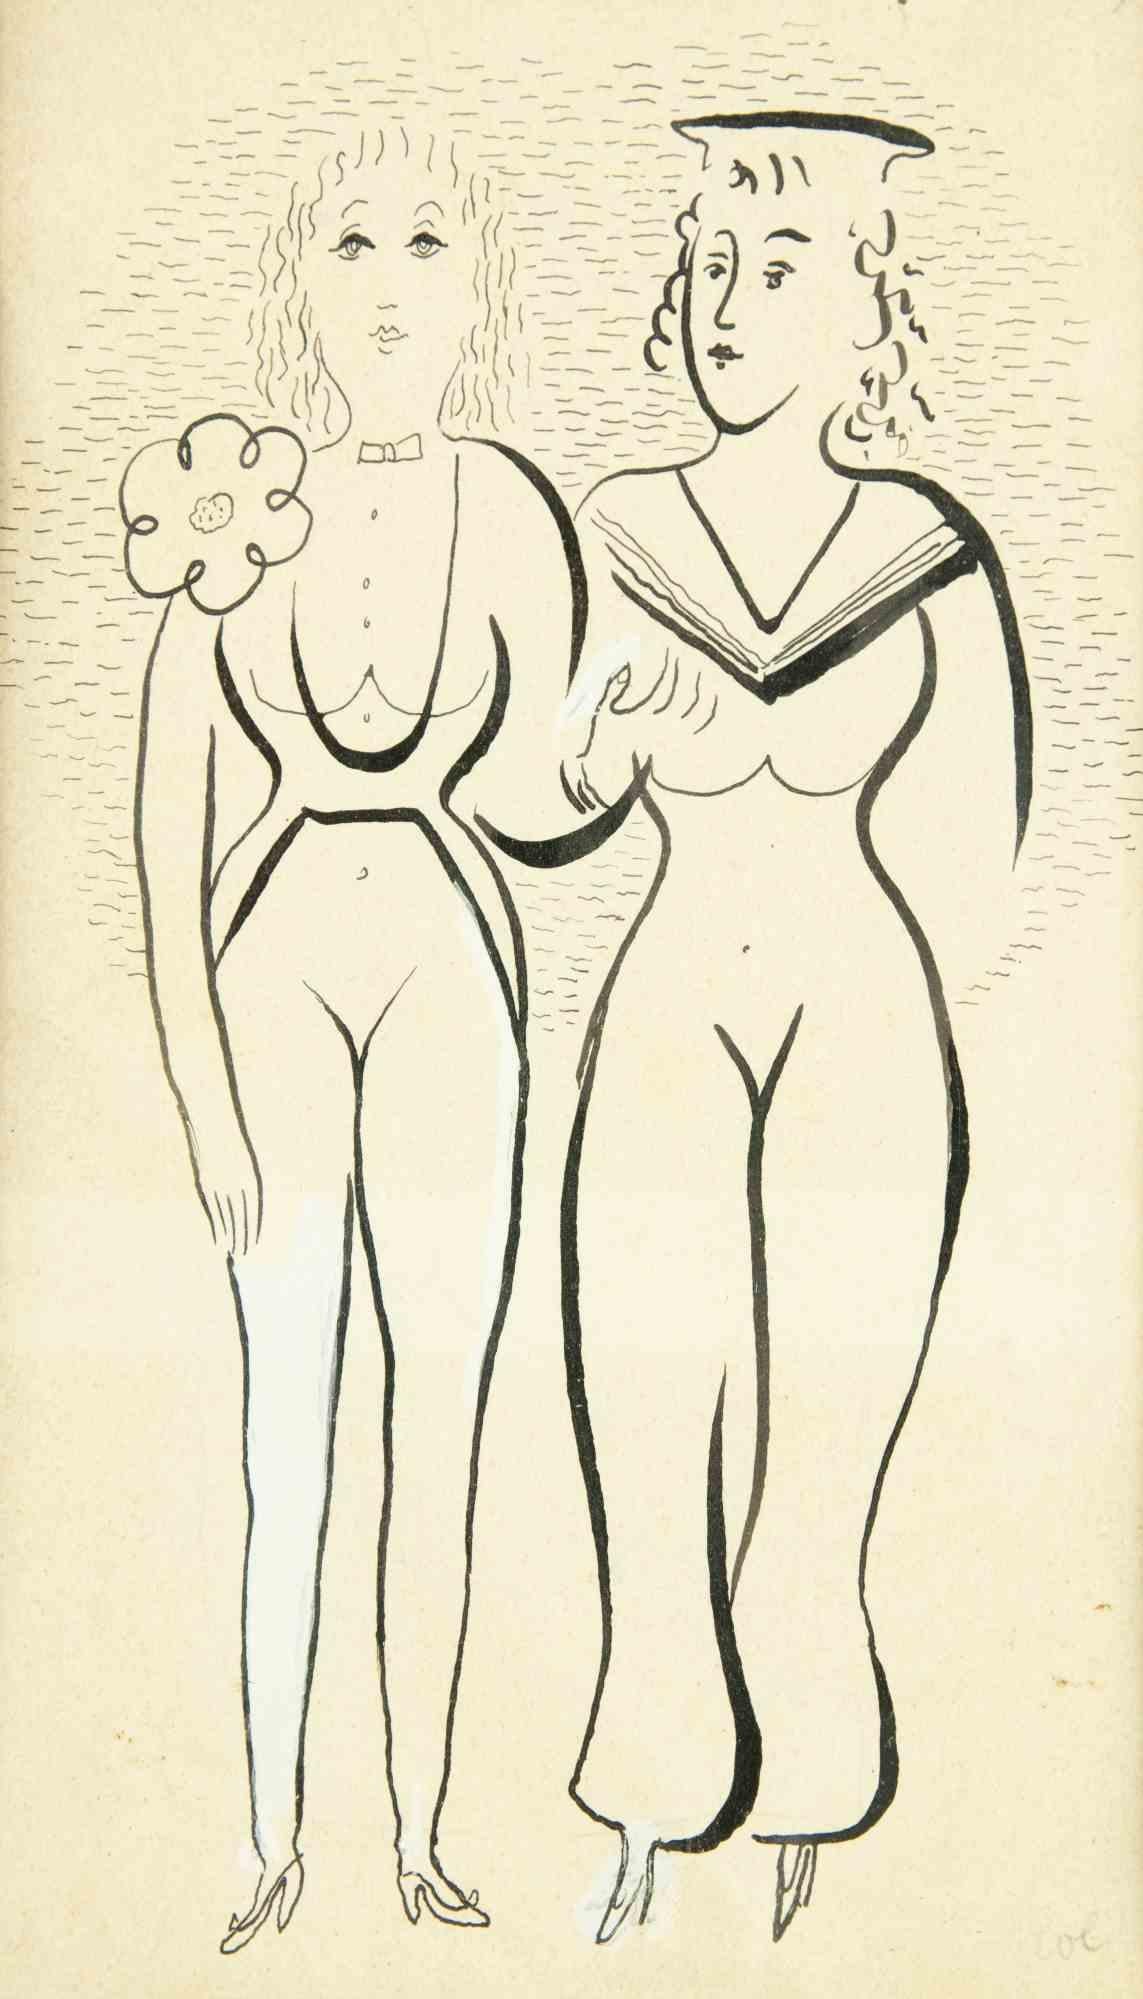 Two women - l Drawing by Mario Mafai - Early 20th Century